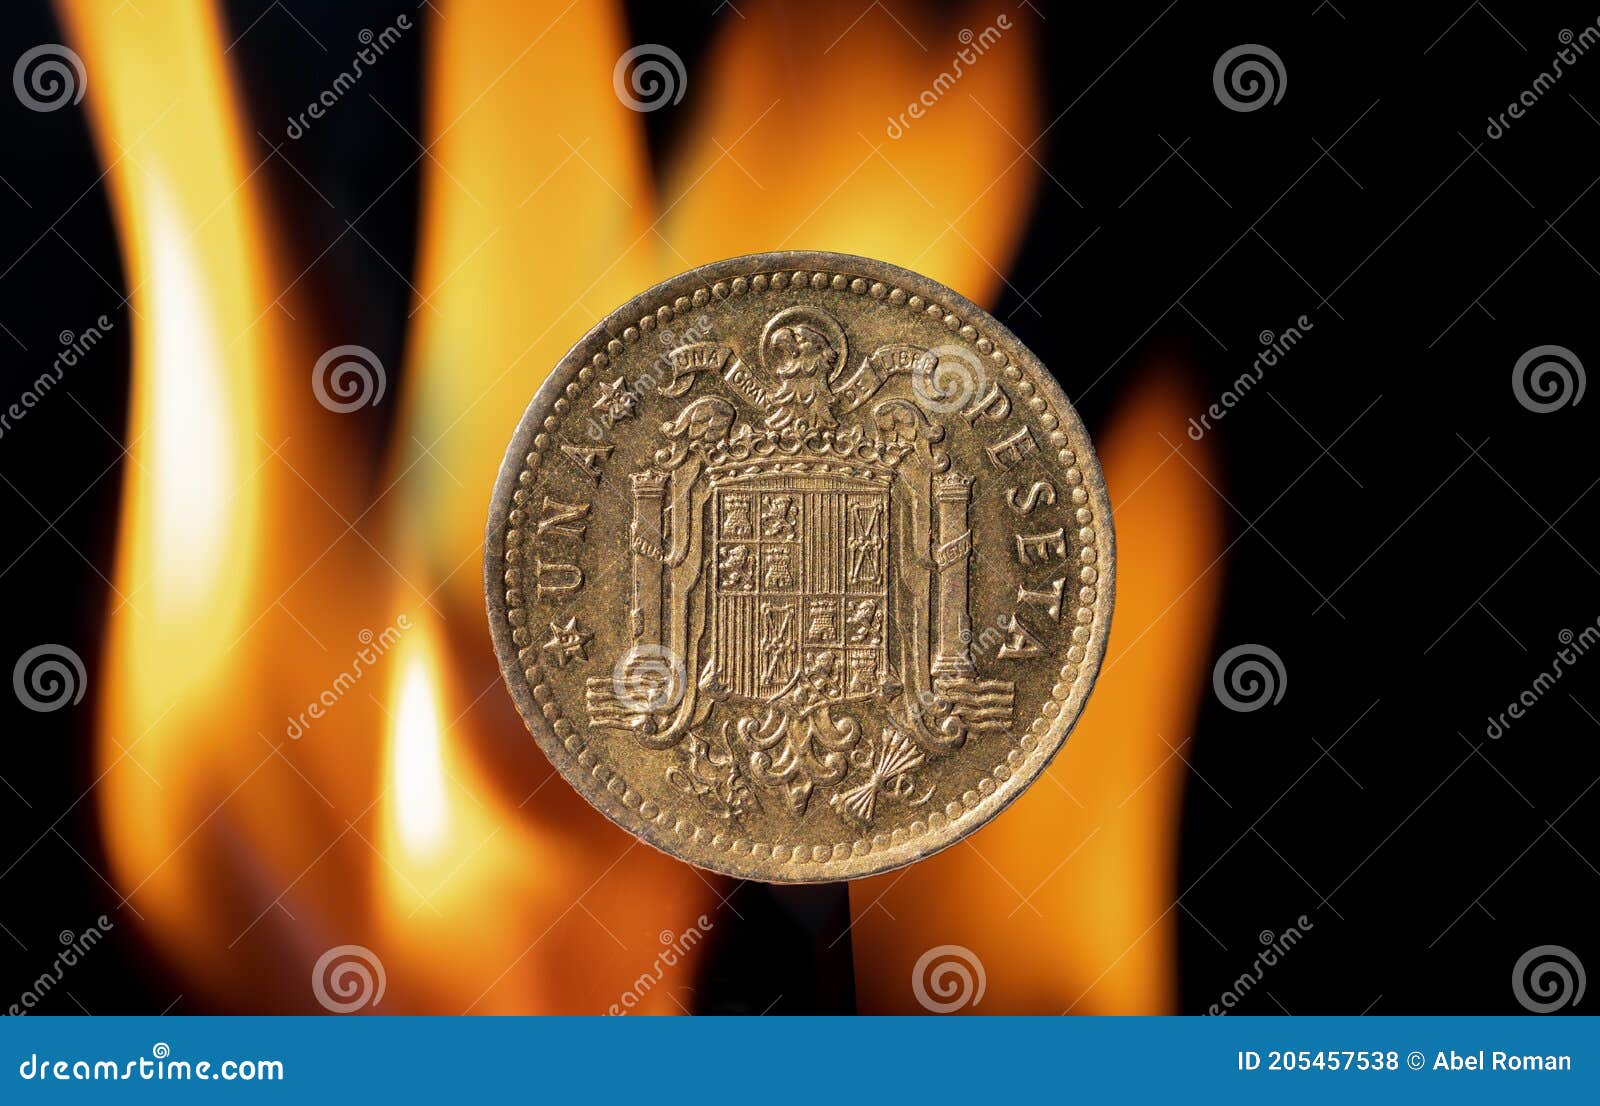 old peseta coin with the coat of arms of franco`s spain